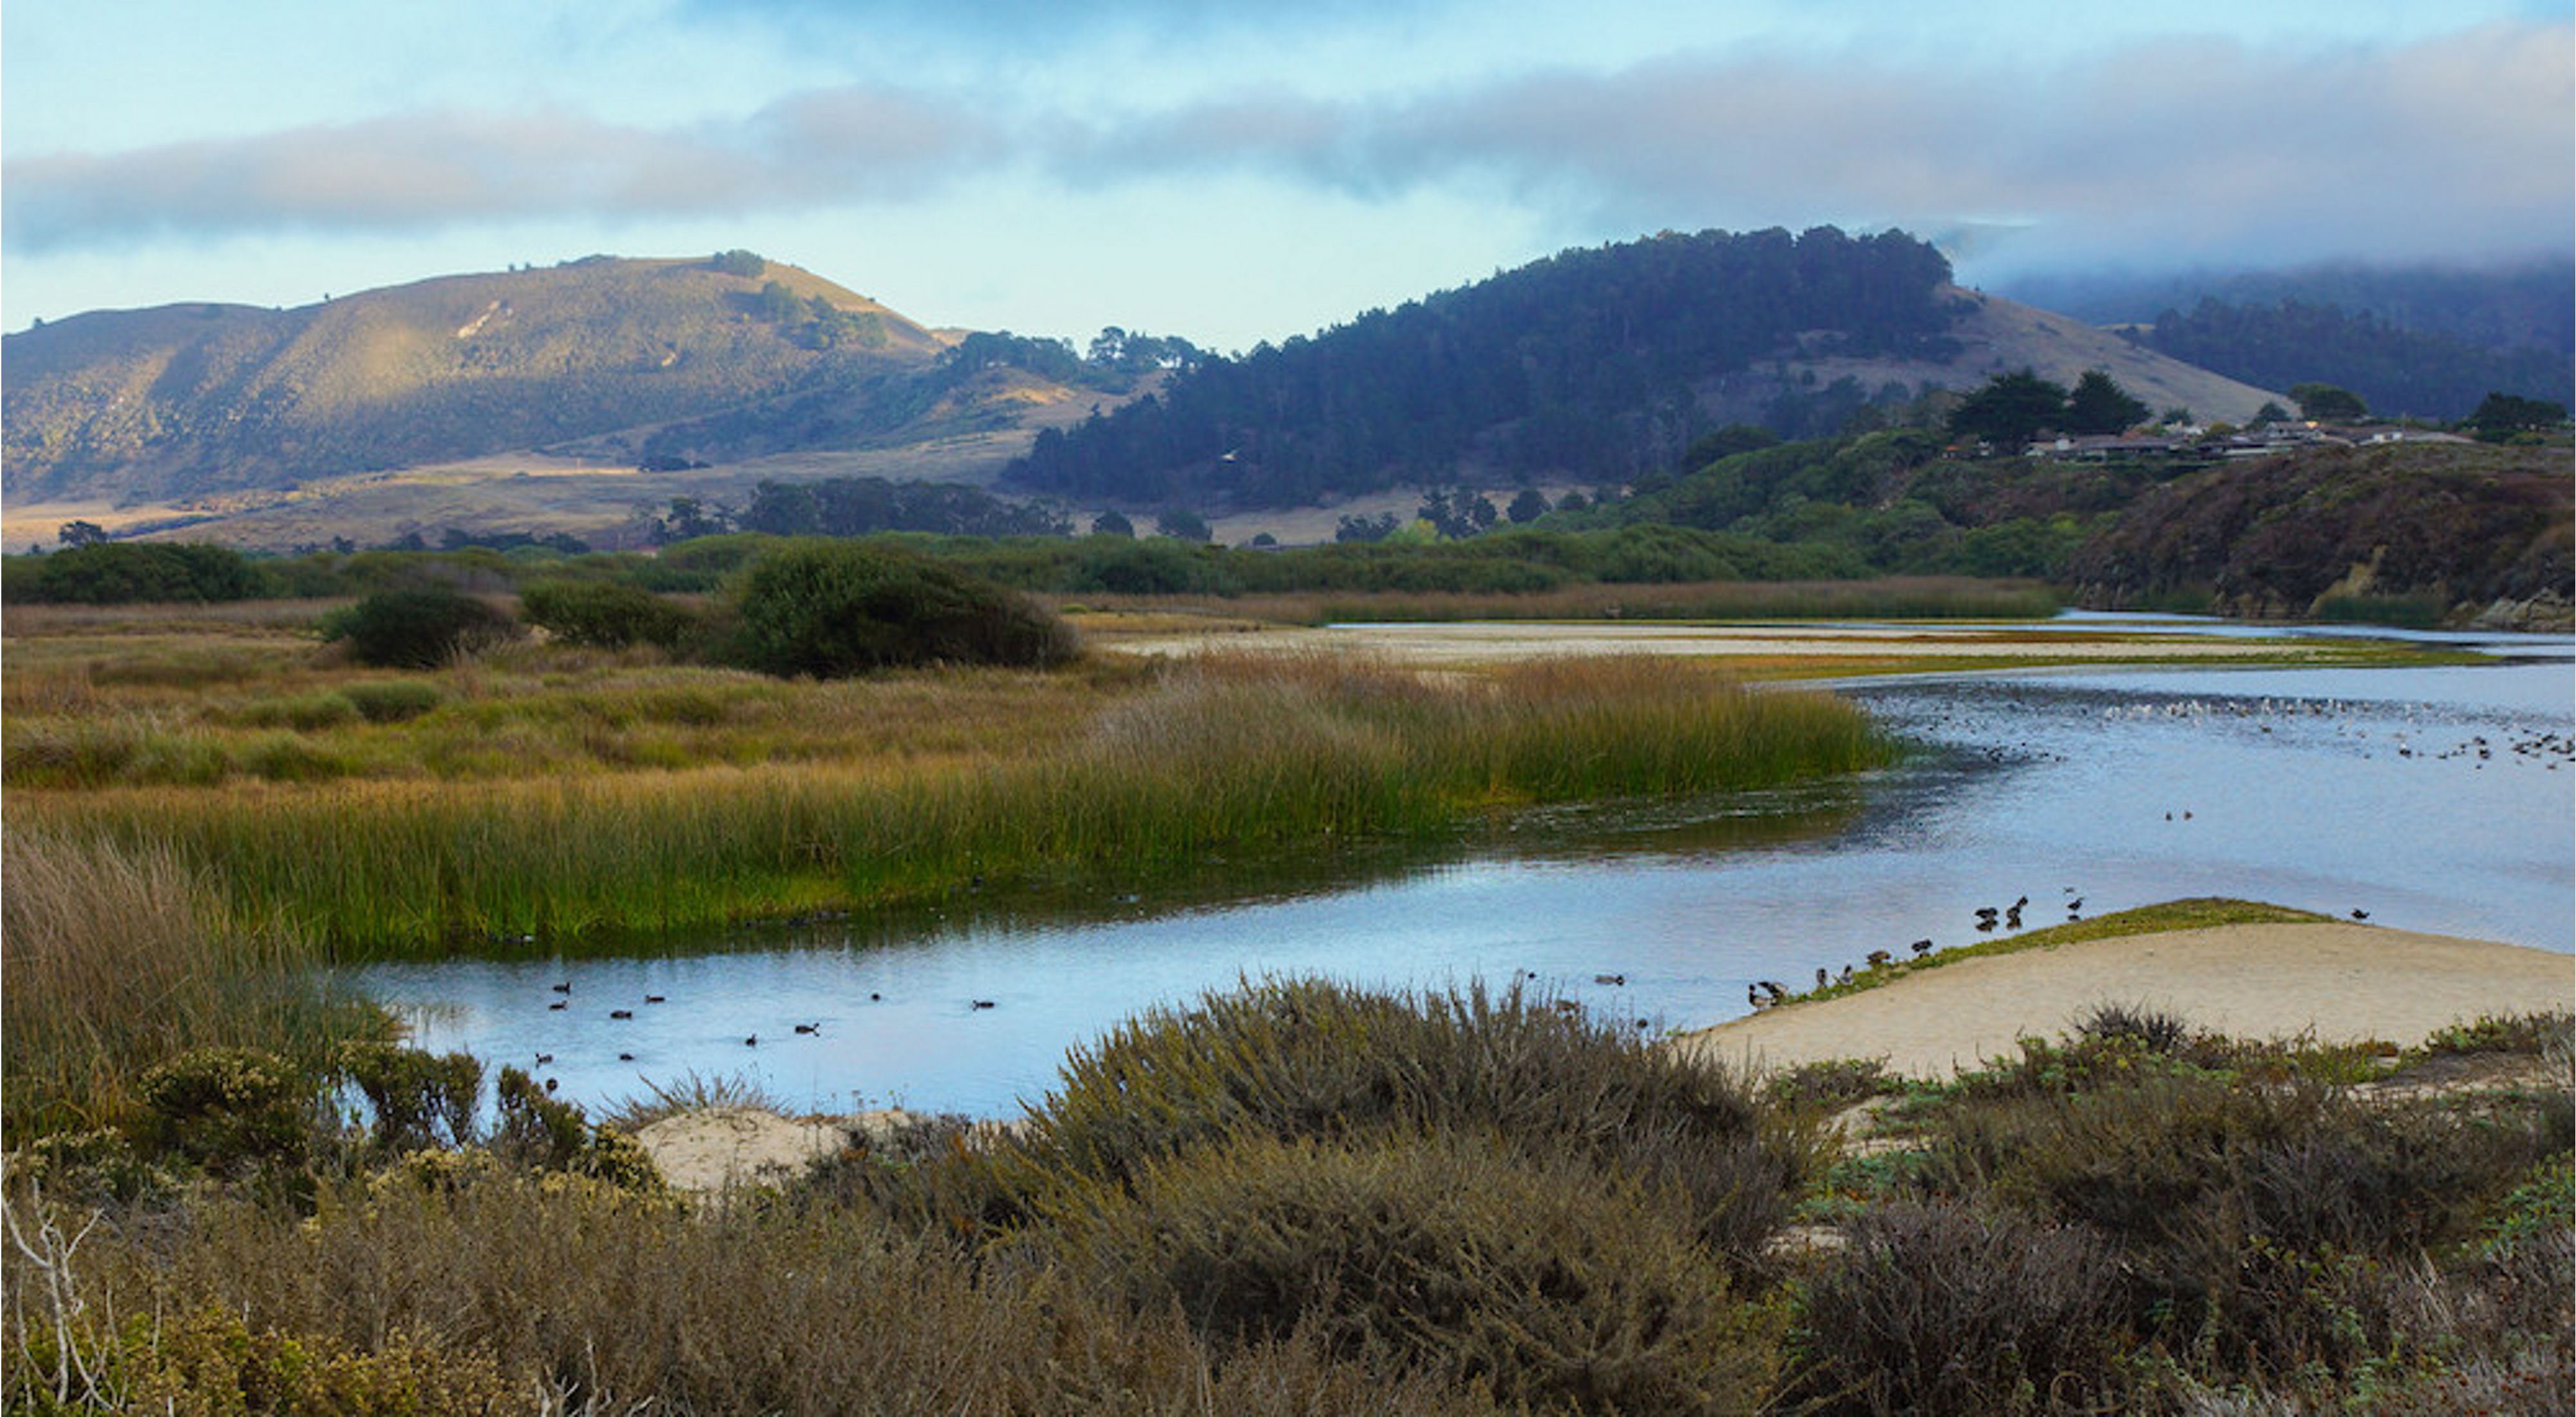 Wetlands with birds and grassy areas with hills in the background.